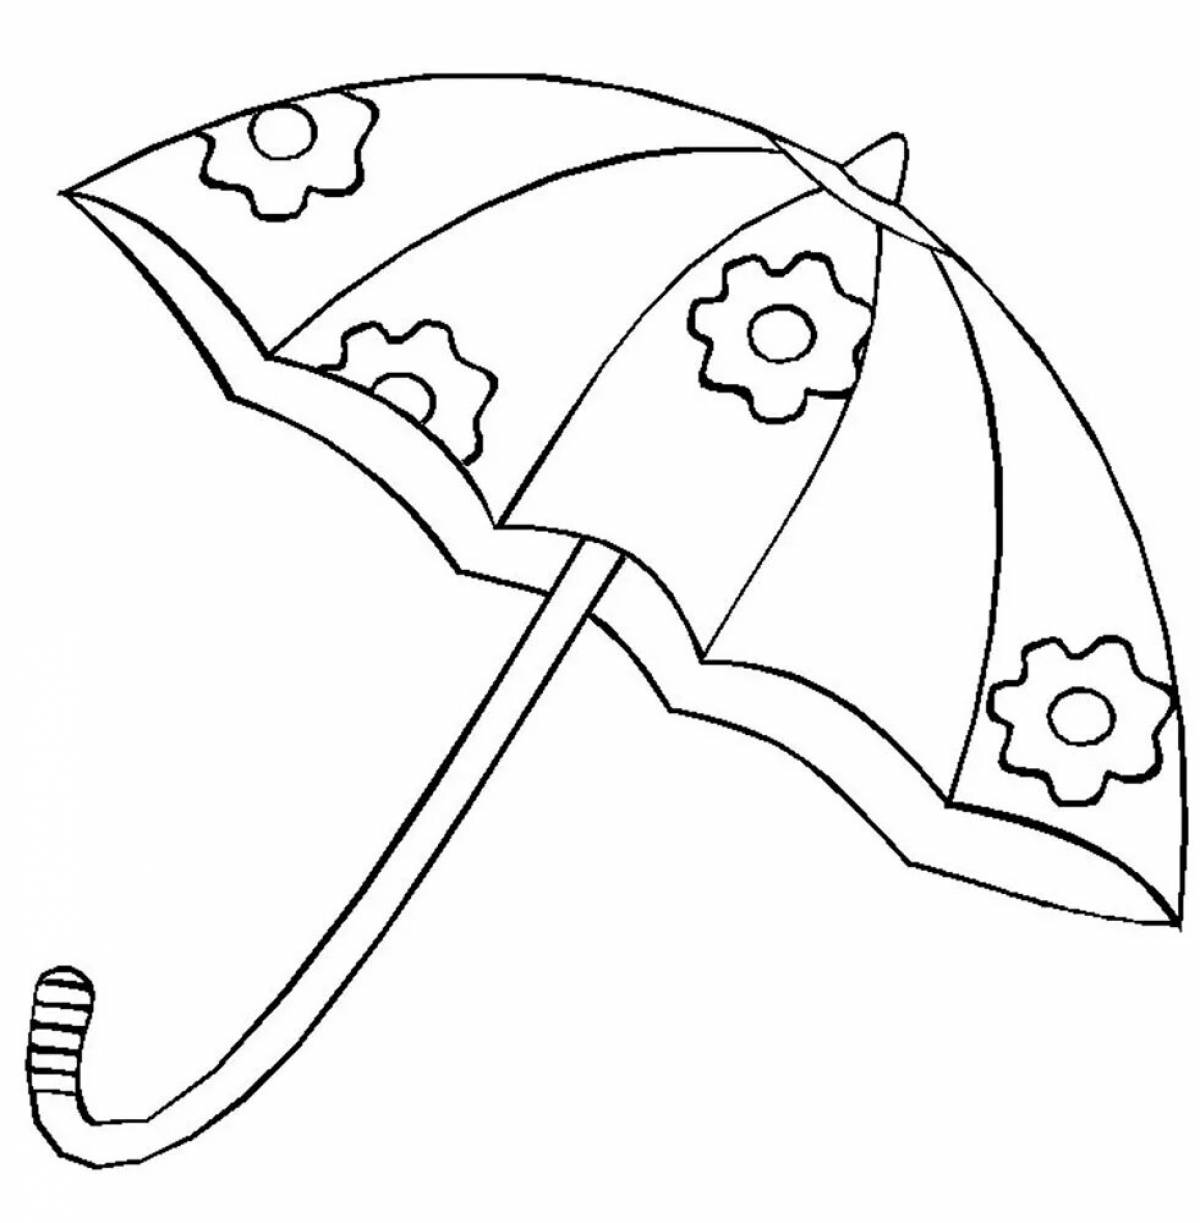 Colored coloring pages with umbrellas for children 4-5 years old